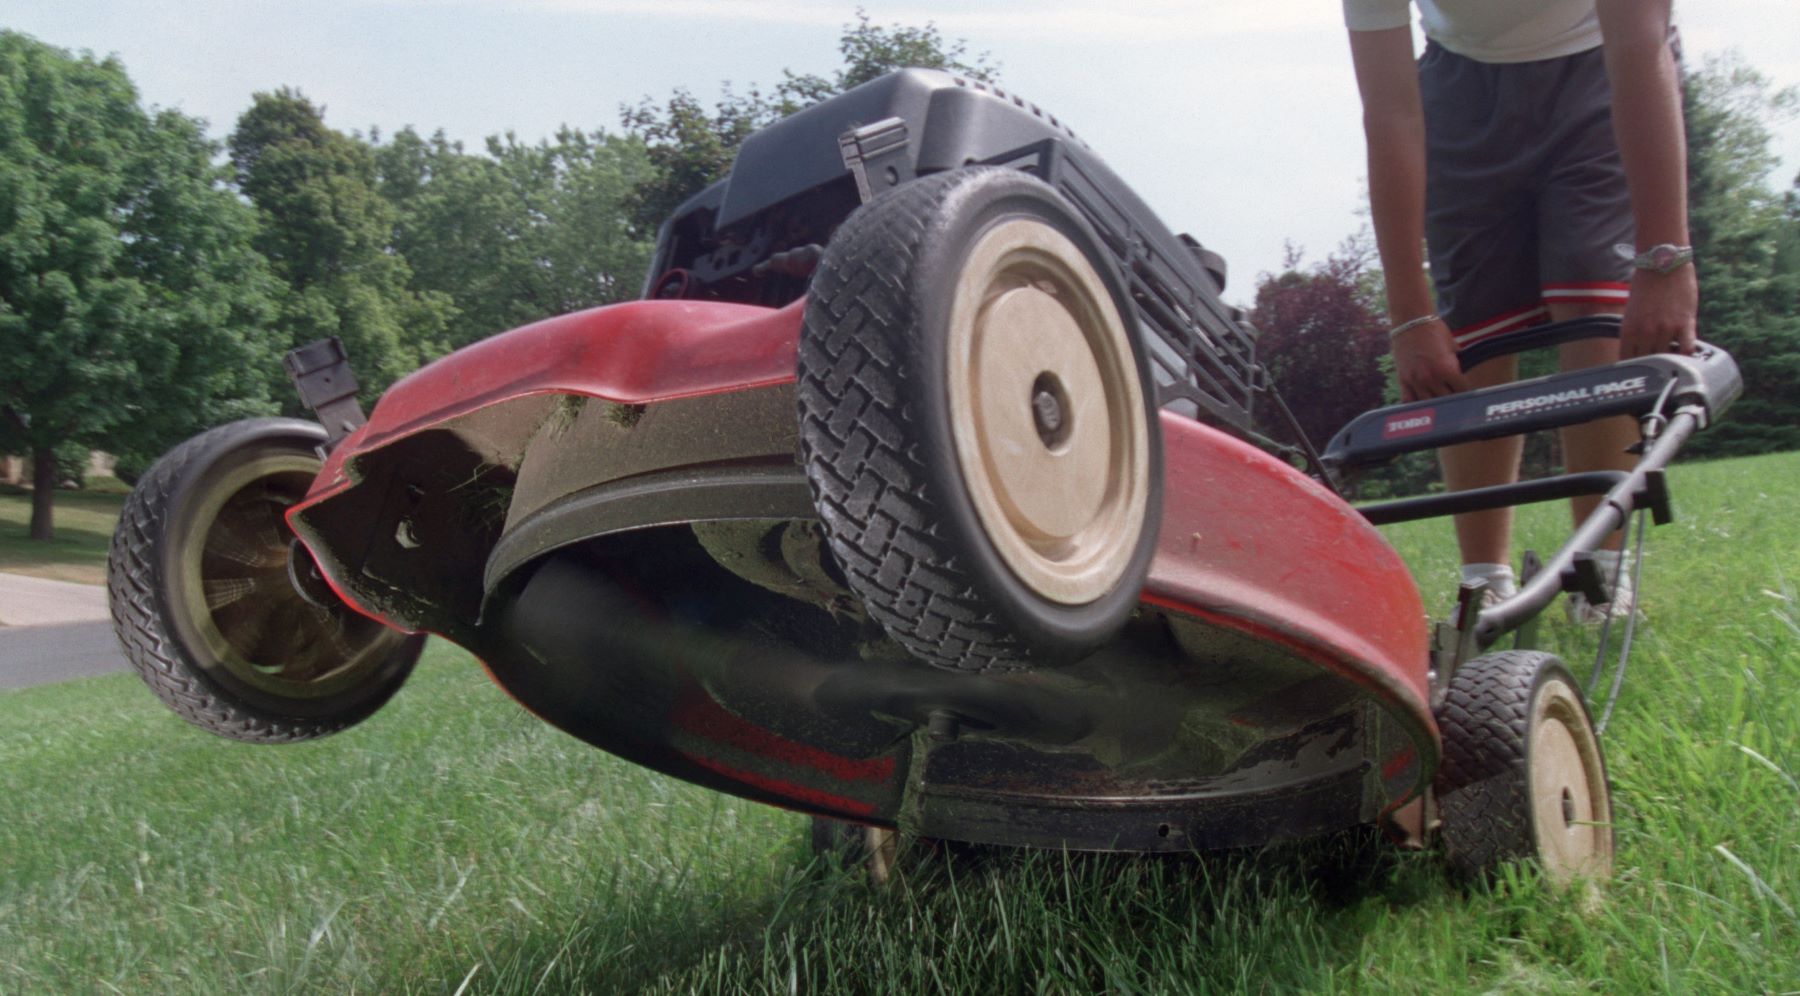 A tilted back lawn mower showing the dangerous spinning blade, which causes many safety accidents